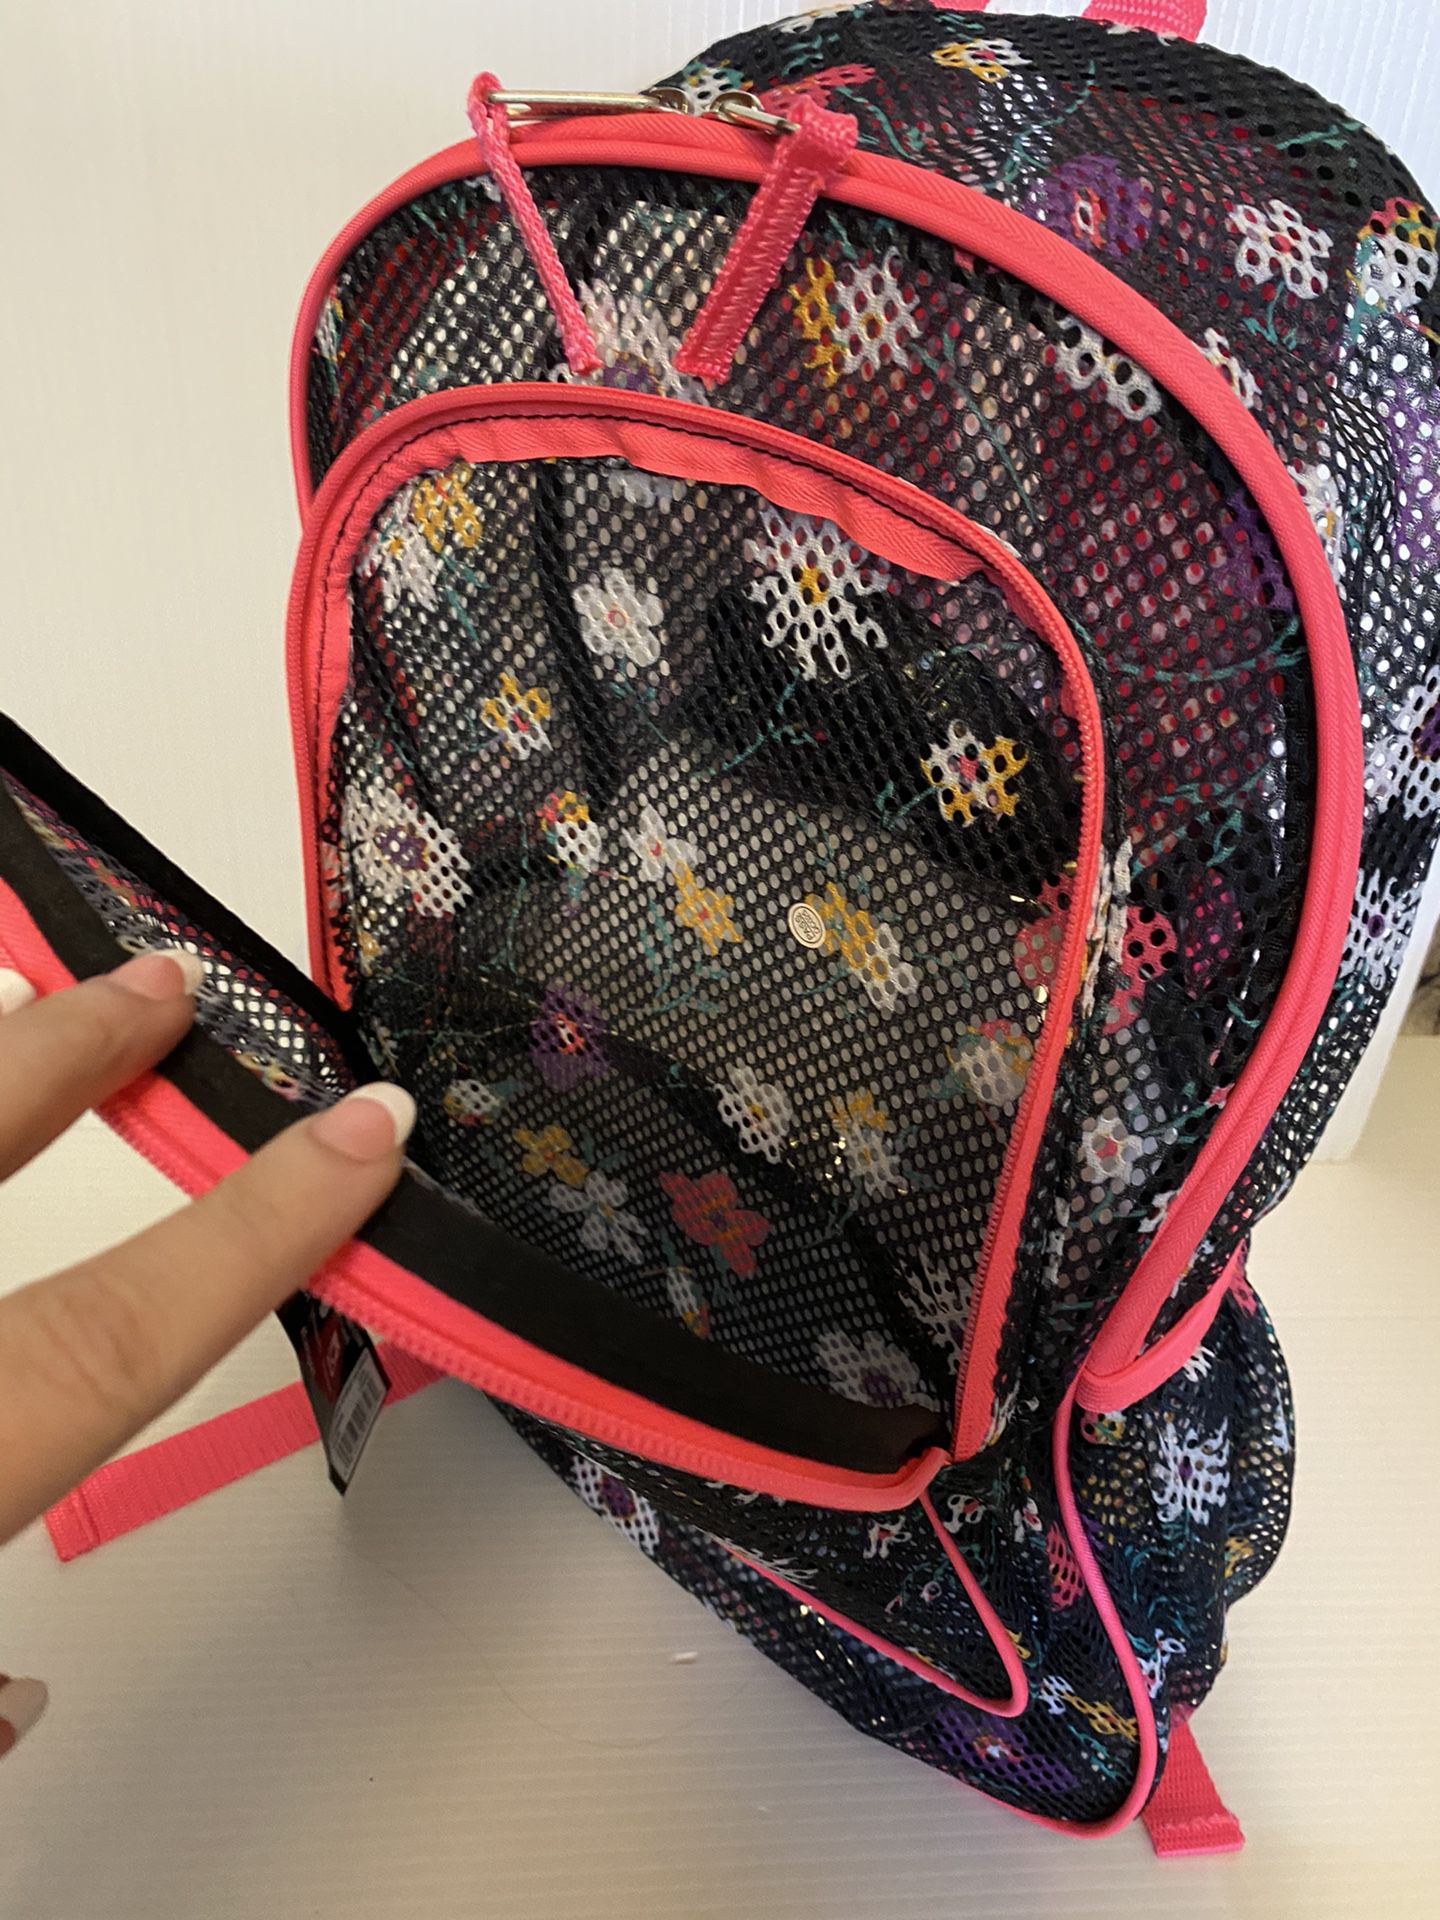 Extra Cute NEW EASTSPORT Mesh Backpack!